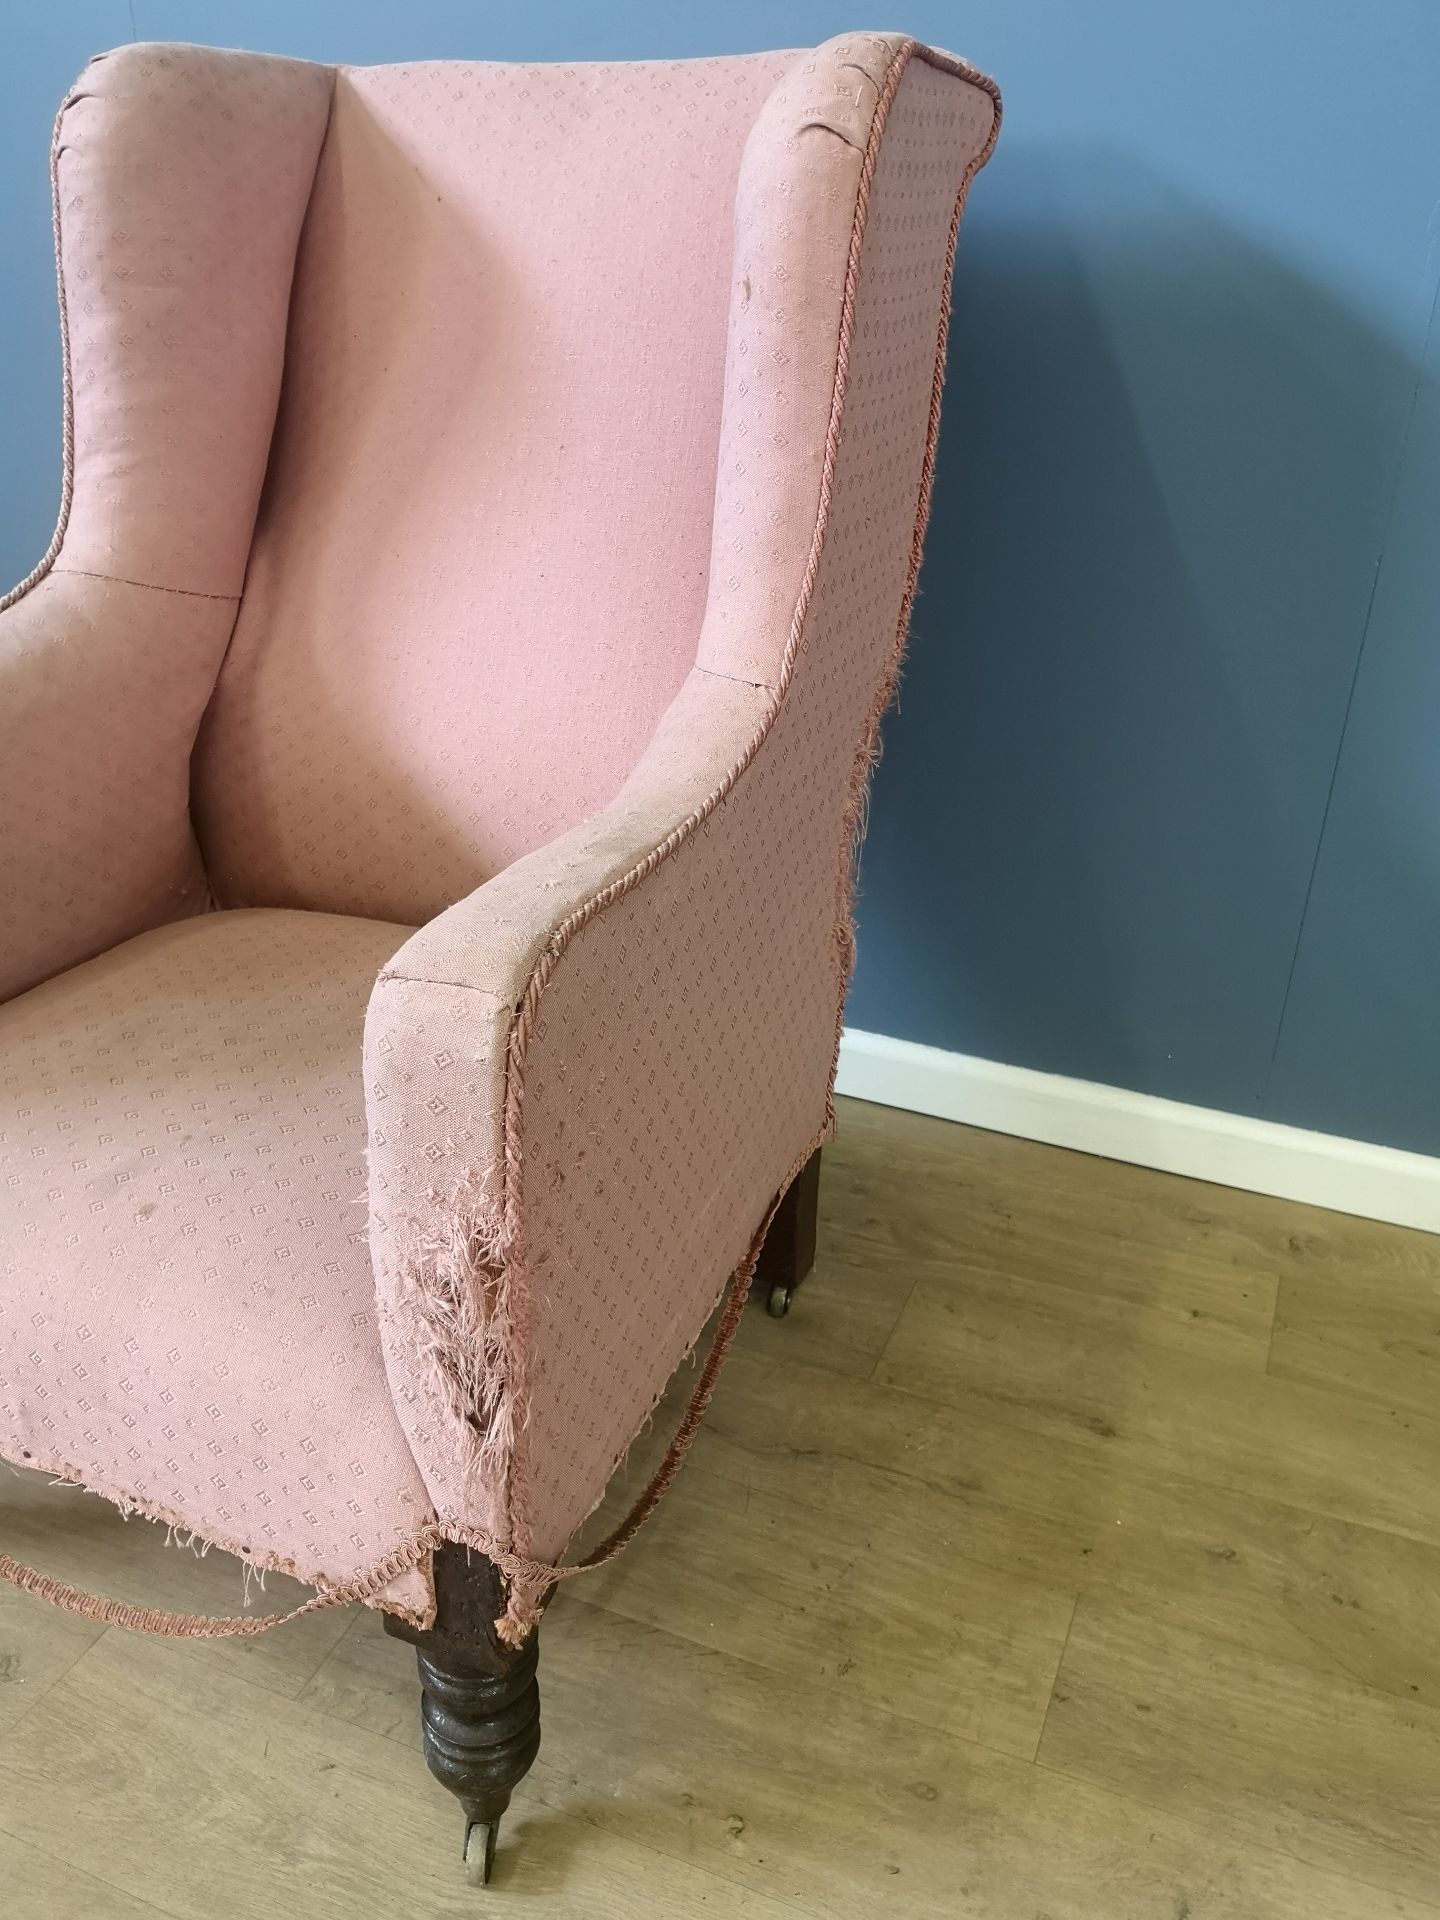 Upholstered wingback armchair - Image 2 of 4